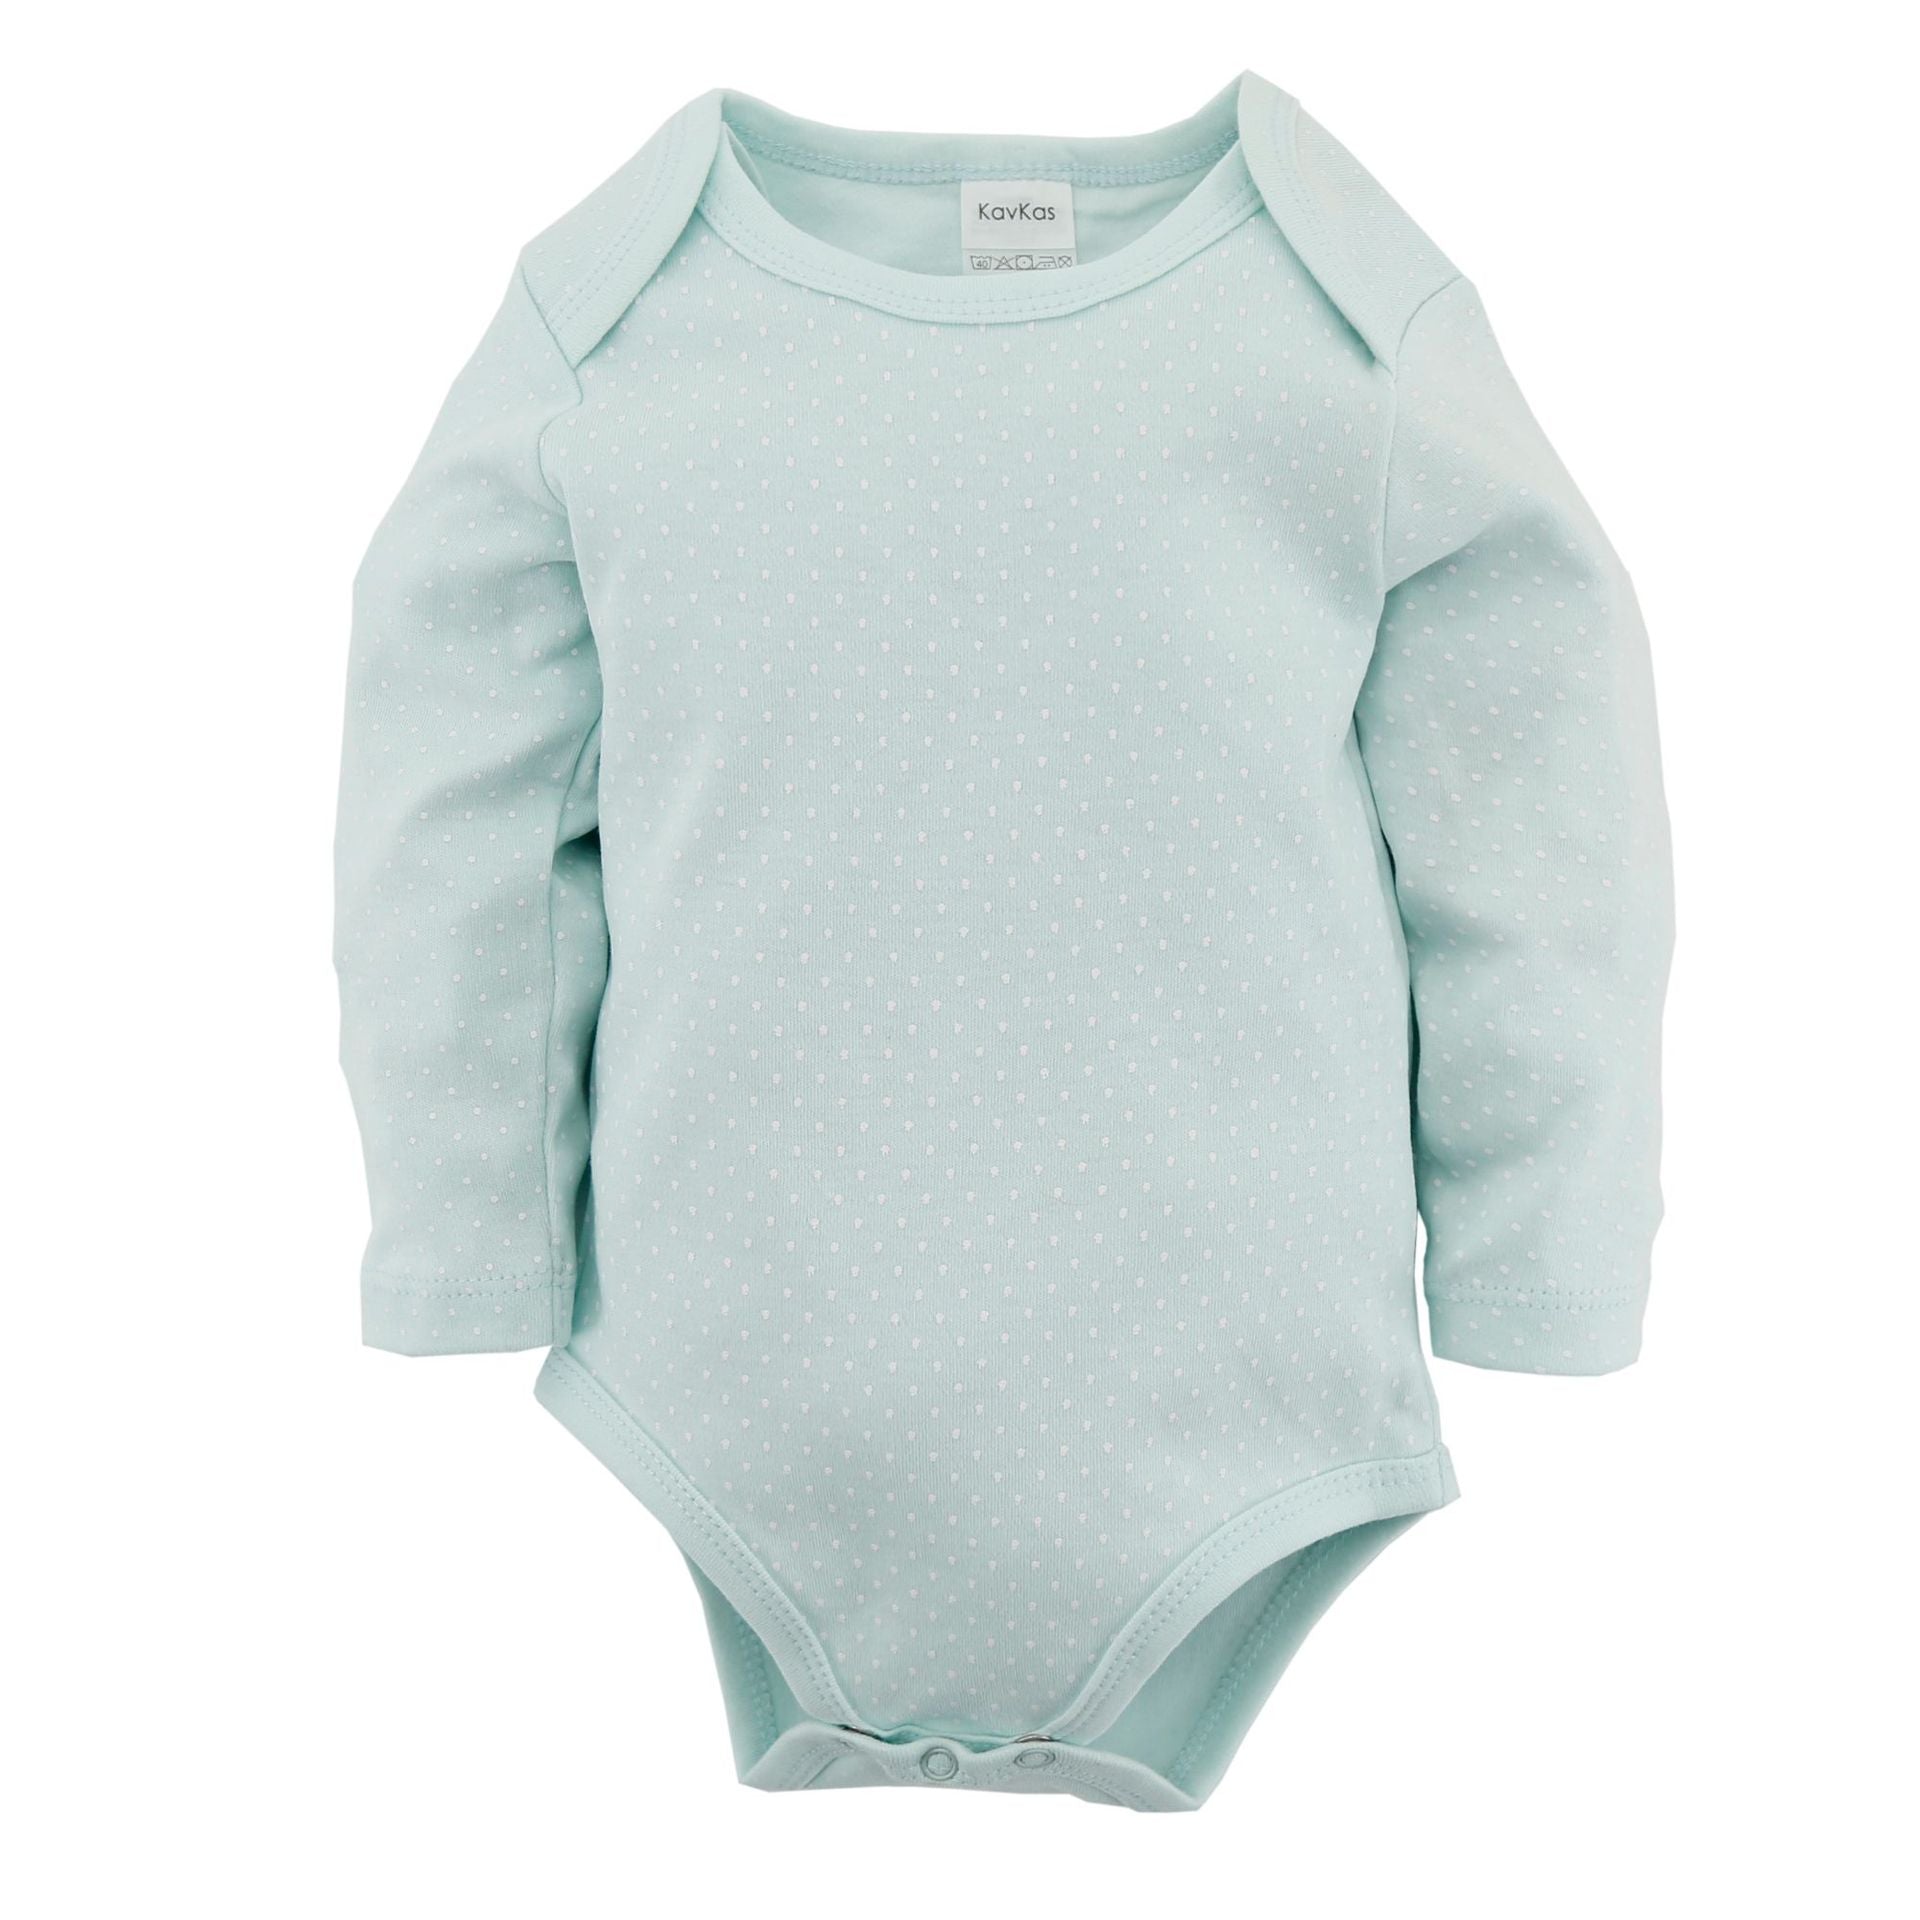 Baby Onesie Cotton Long-Sleeved Baby Clothes